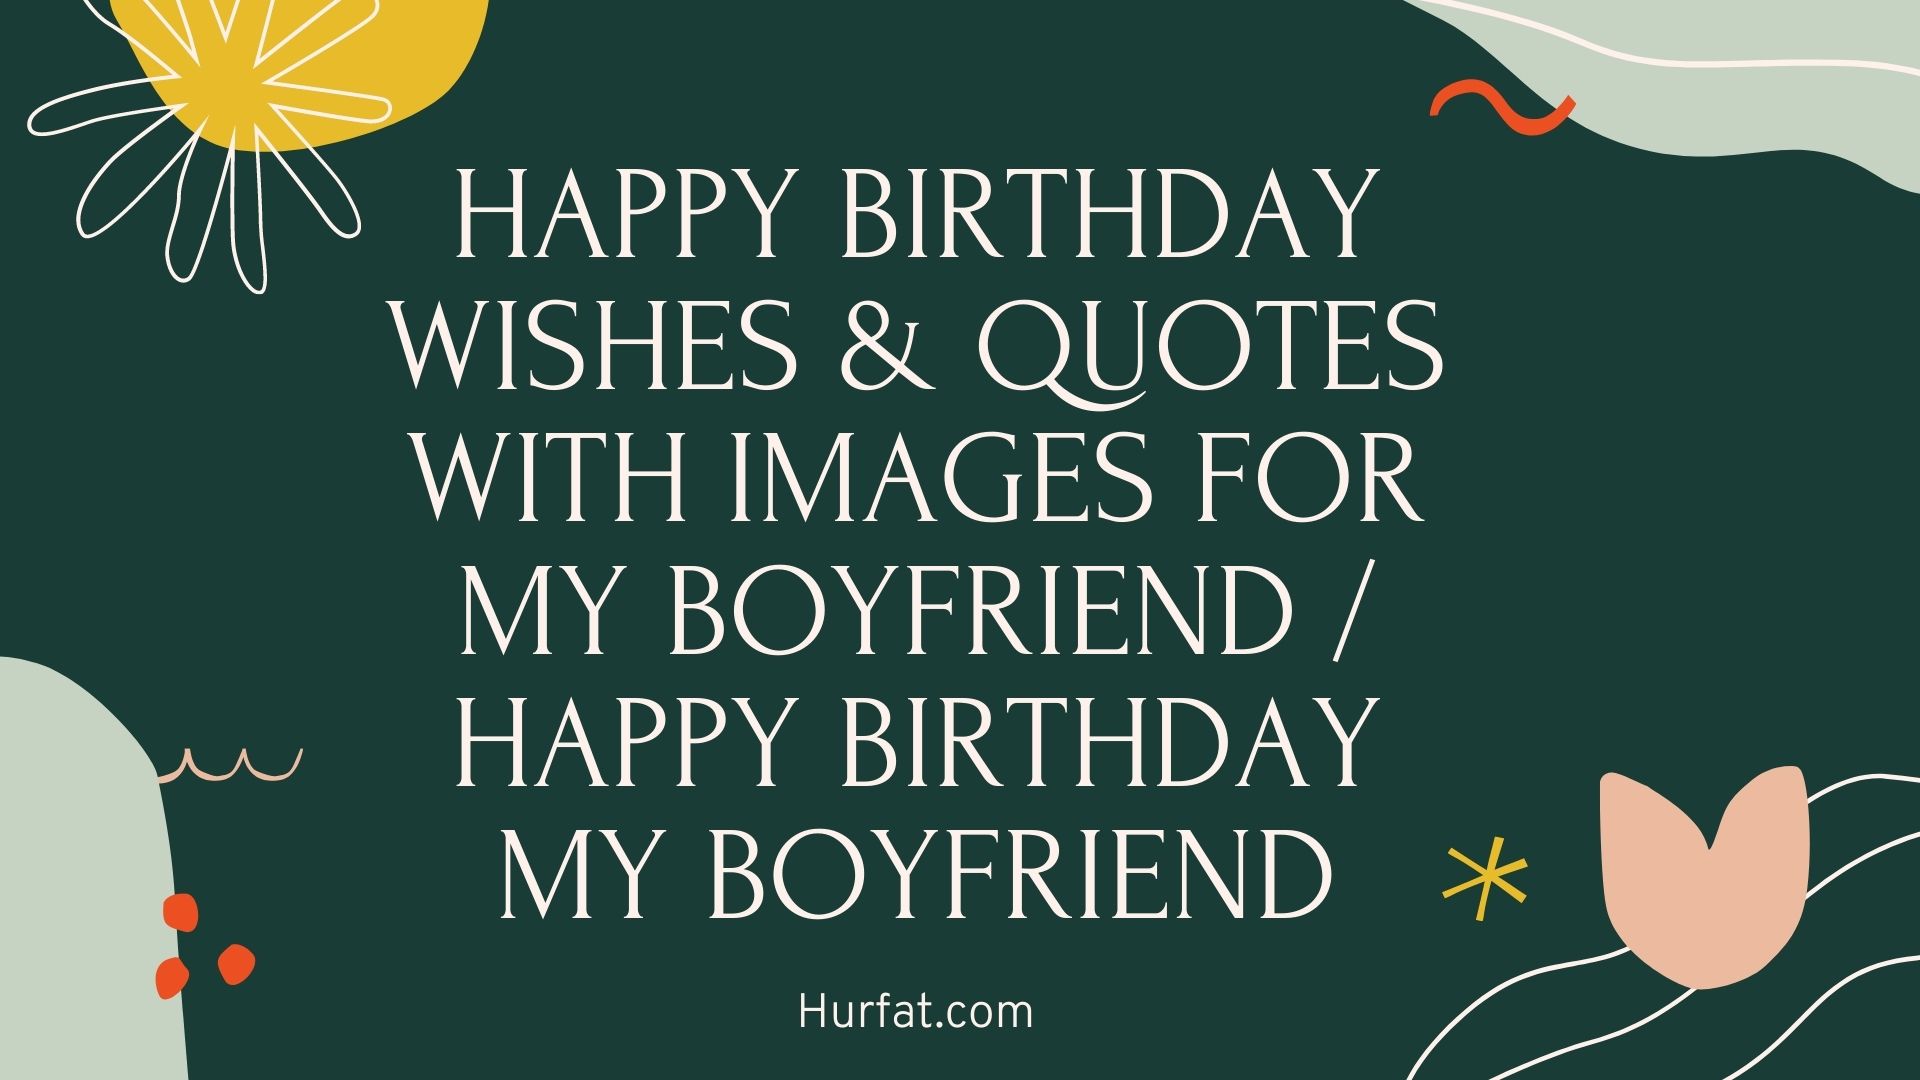 Happy Birthday Wishes & Quotes With Images For My Boyfriend / Happy B